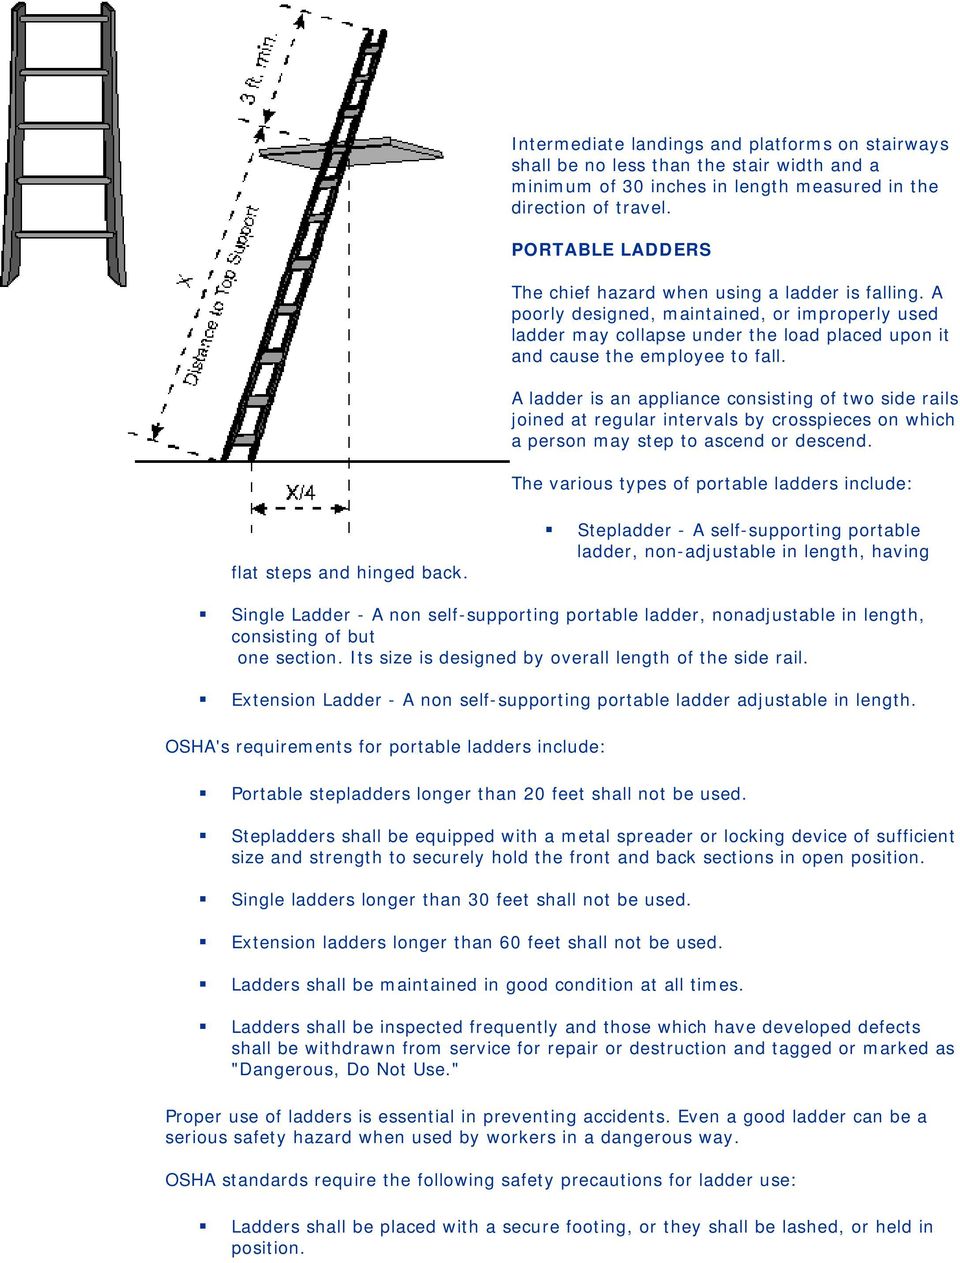 A ladder is an appliance consisting of two side rails joined at regular intervals by crosspieces on which a person may step to ascend or descend.